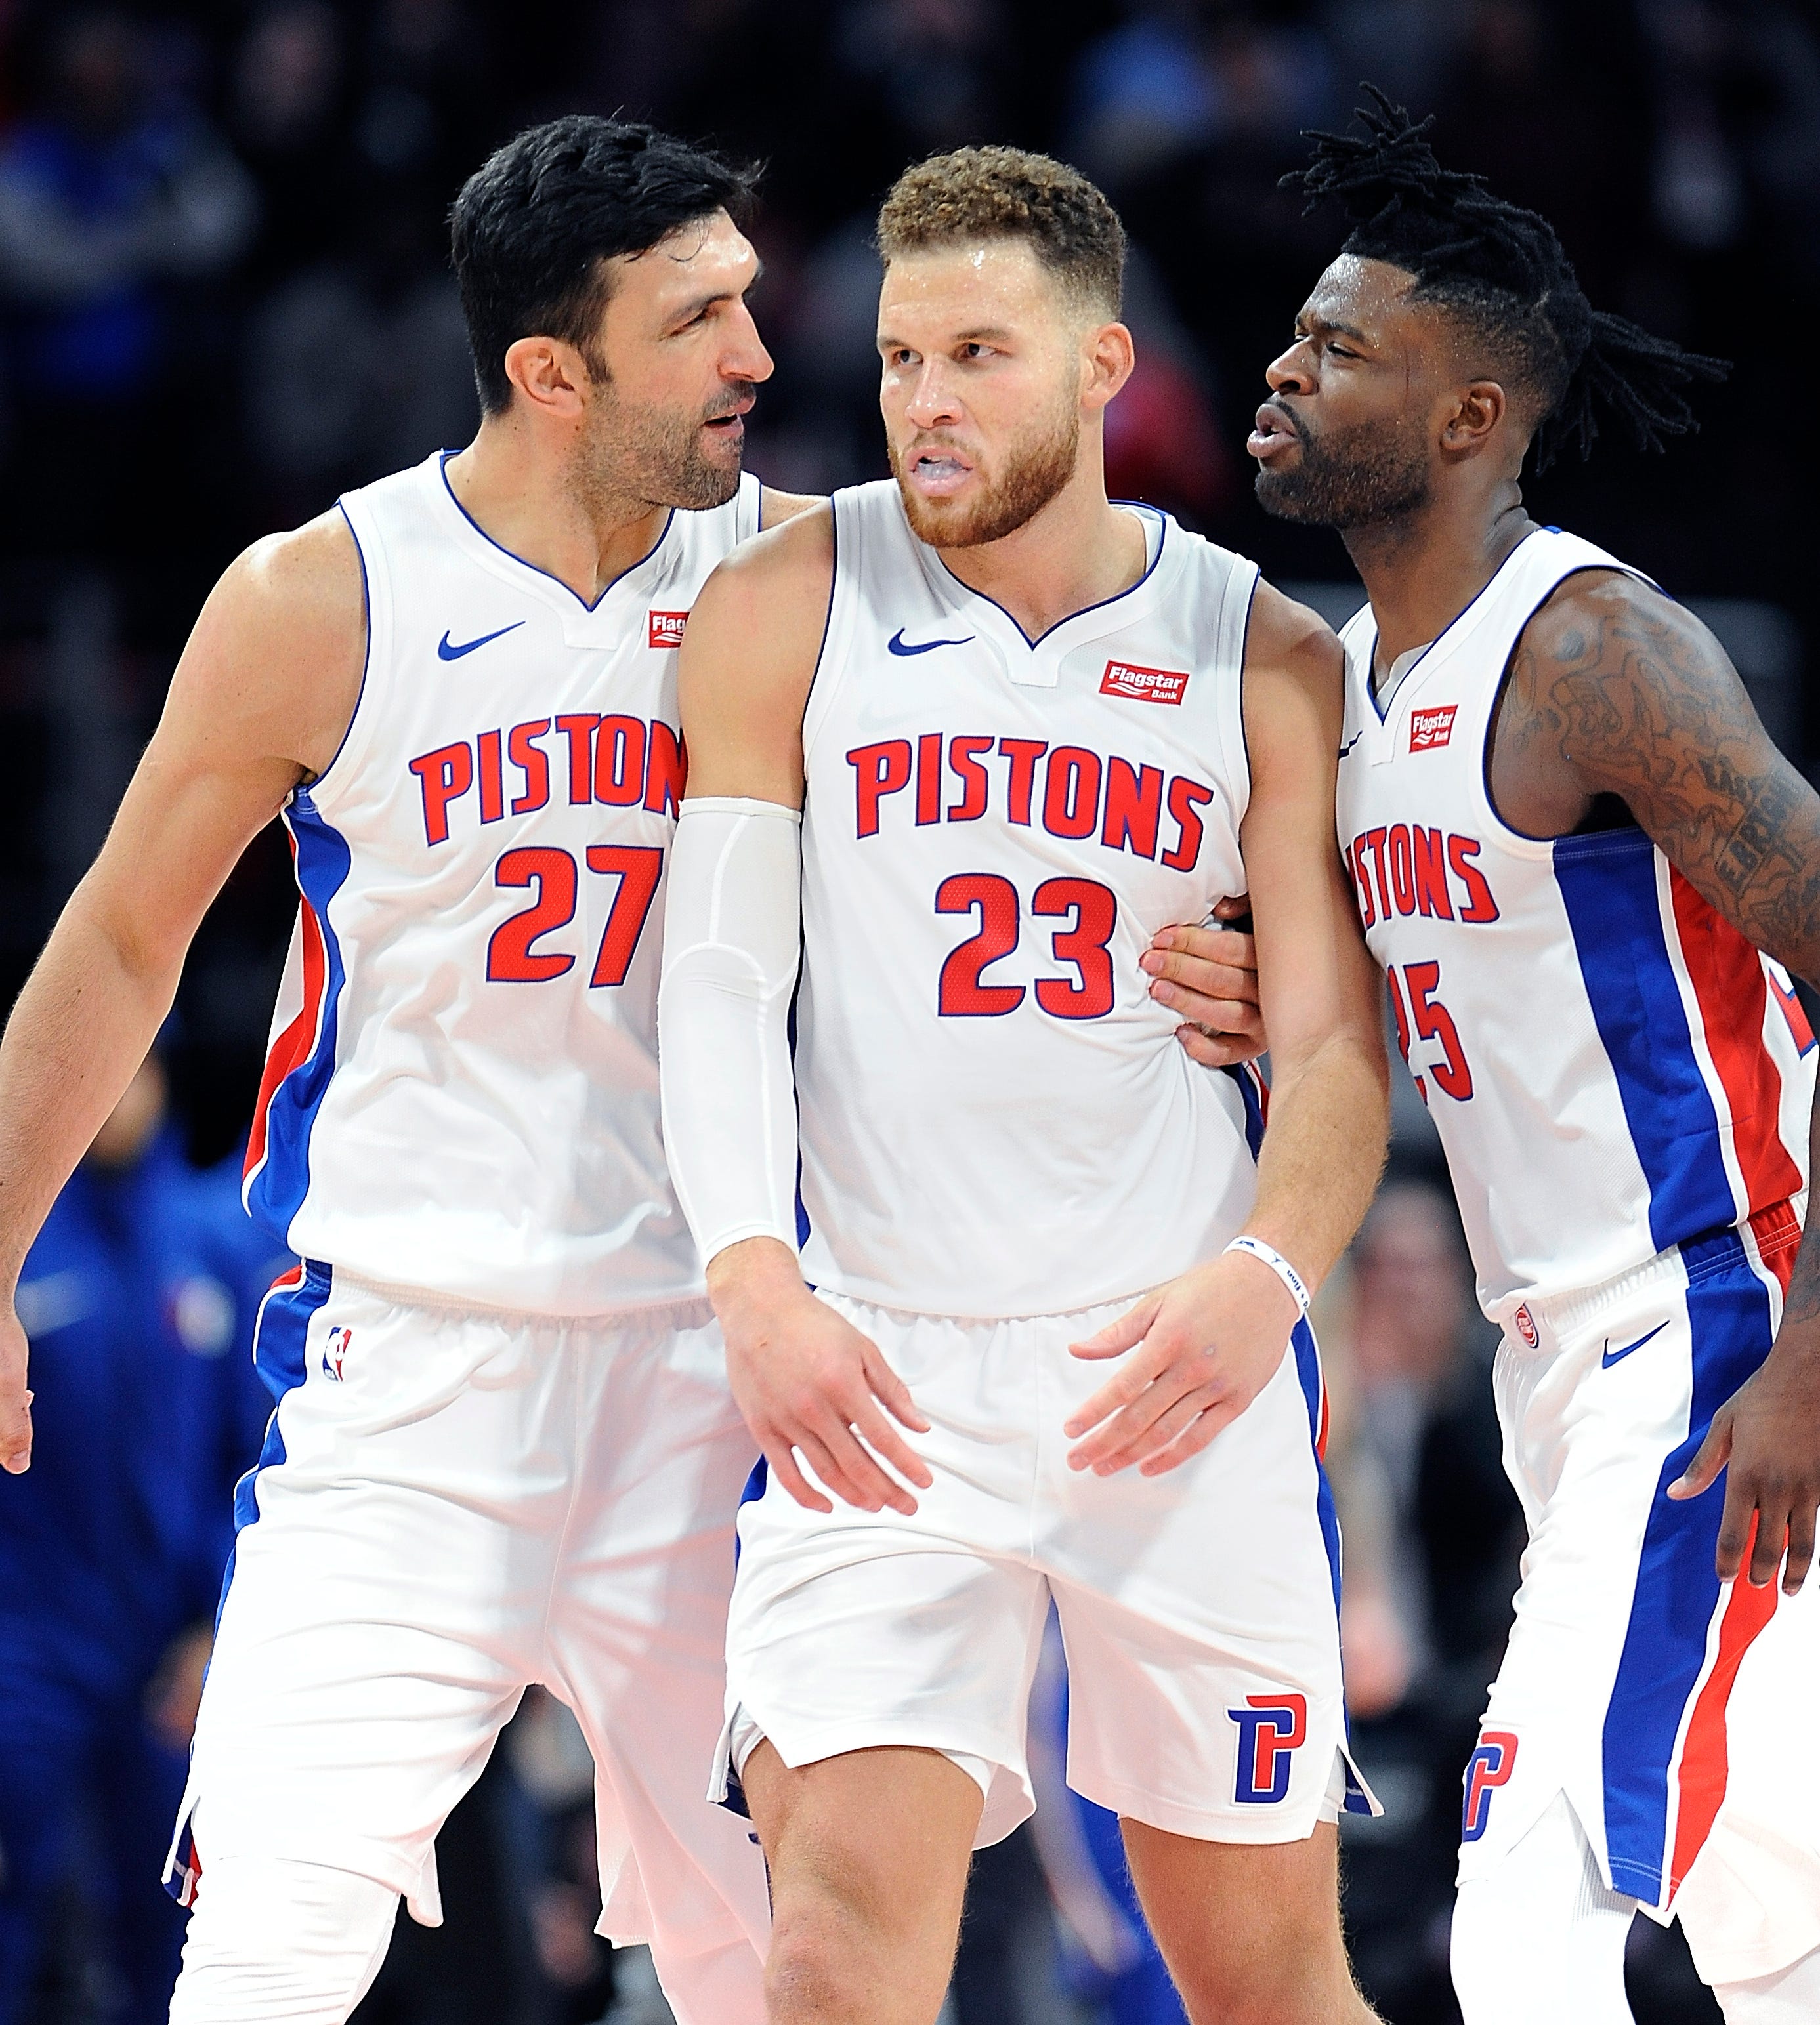 The Pistons' Zaza Pachulia and Reggie Bullock celebrate with Blake Griffin after he completed a three-point play to give the Pistons a one-point lead with 1.8 second left in the game. Griffin had a career high 50 points, The Pistons defeated the 76ers 133-132 in OT, Tuesday, October 23, 2018 at Little Caesars Arena in Detroit, Michigan.